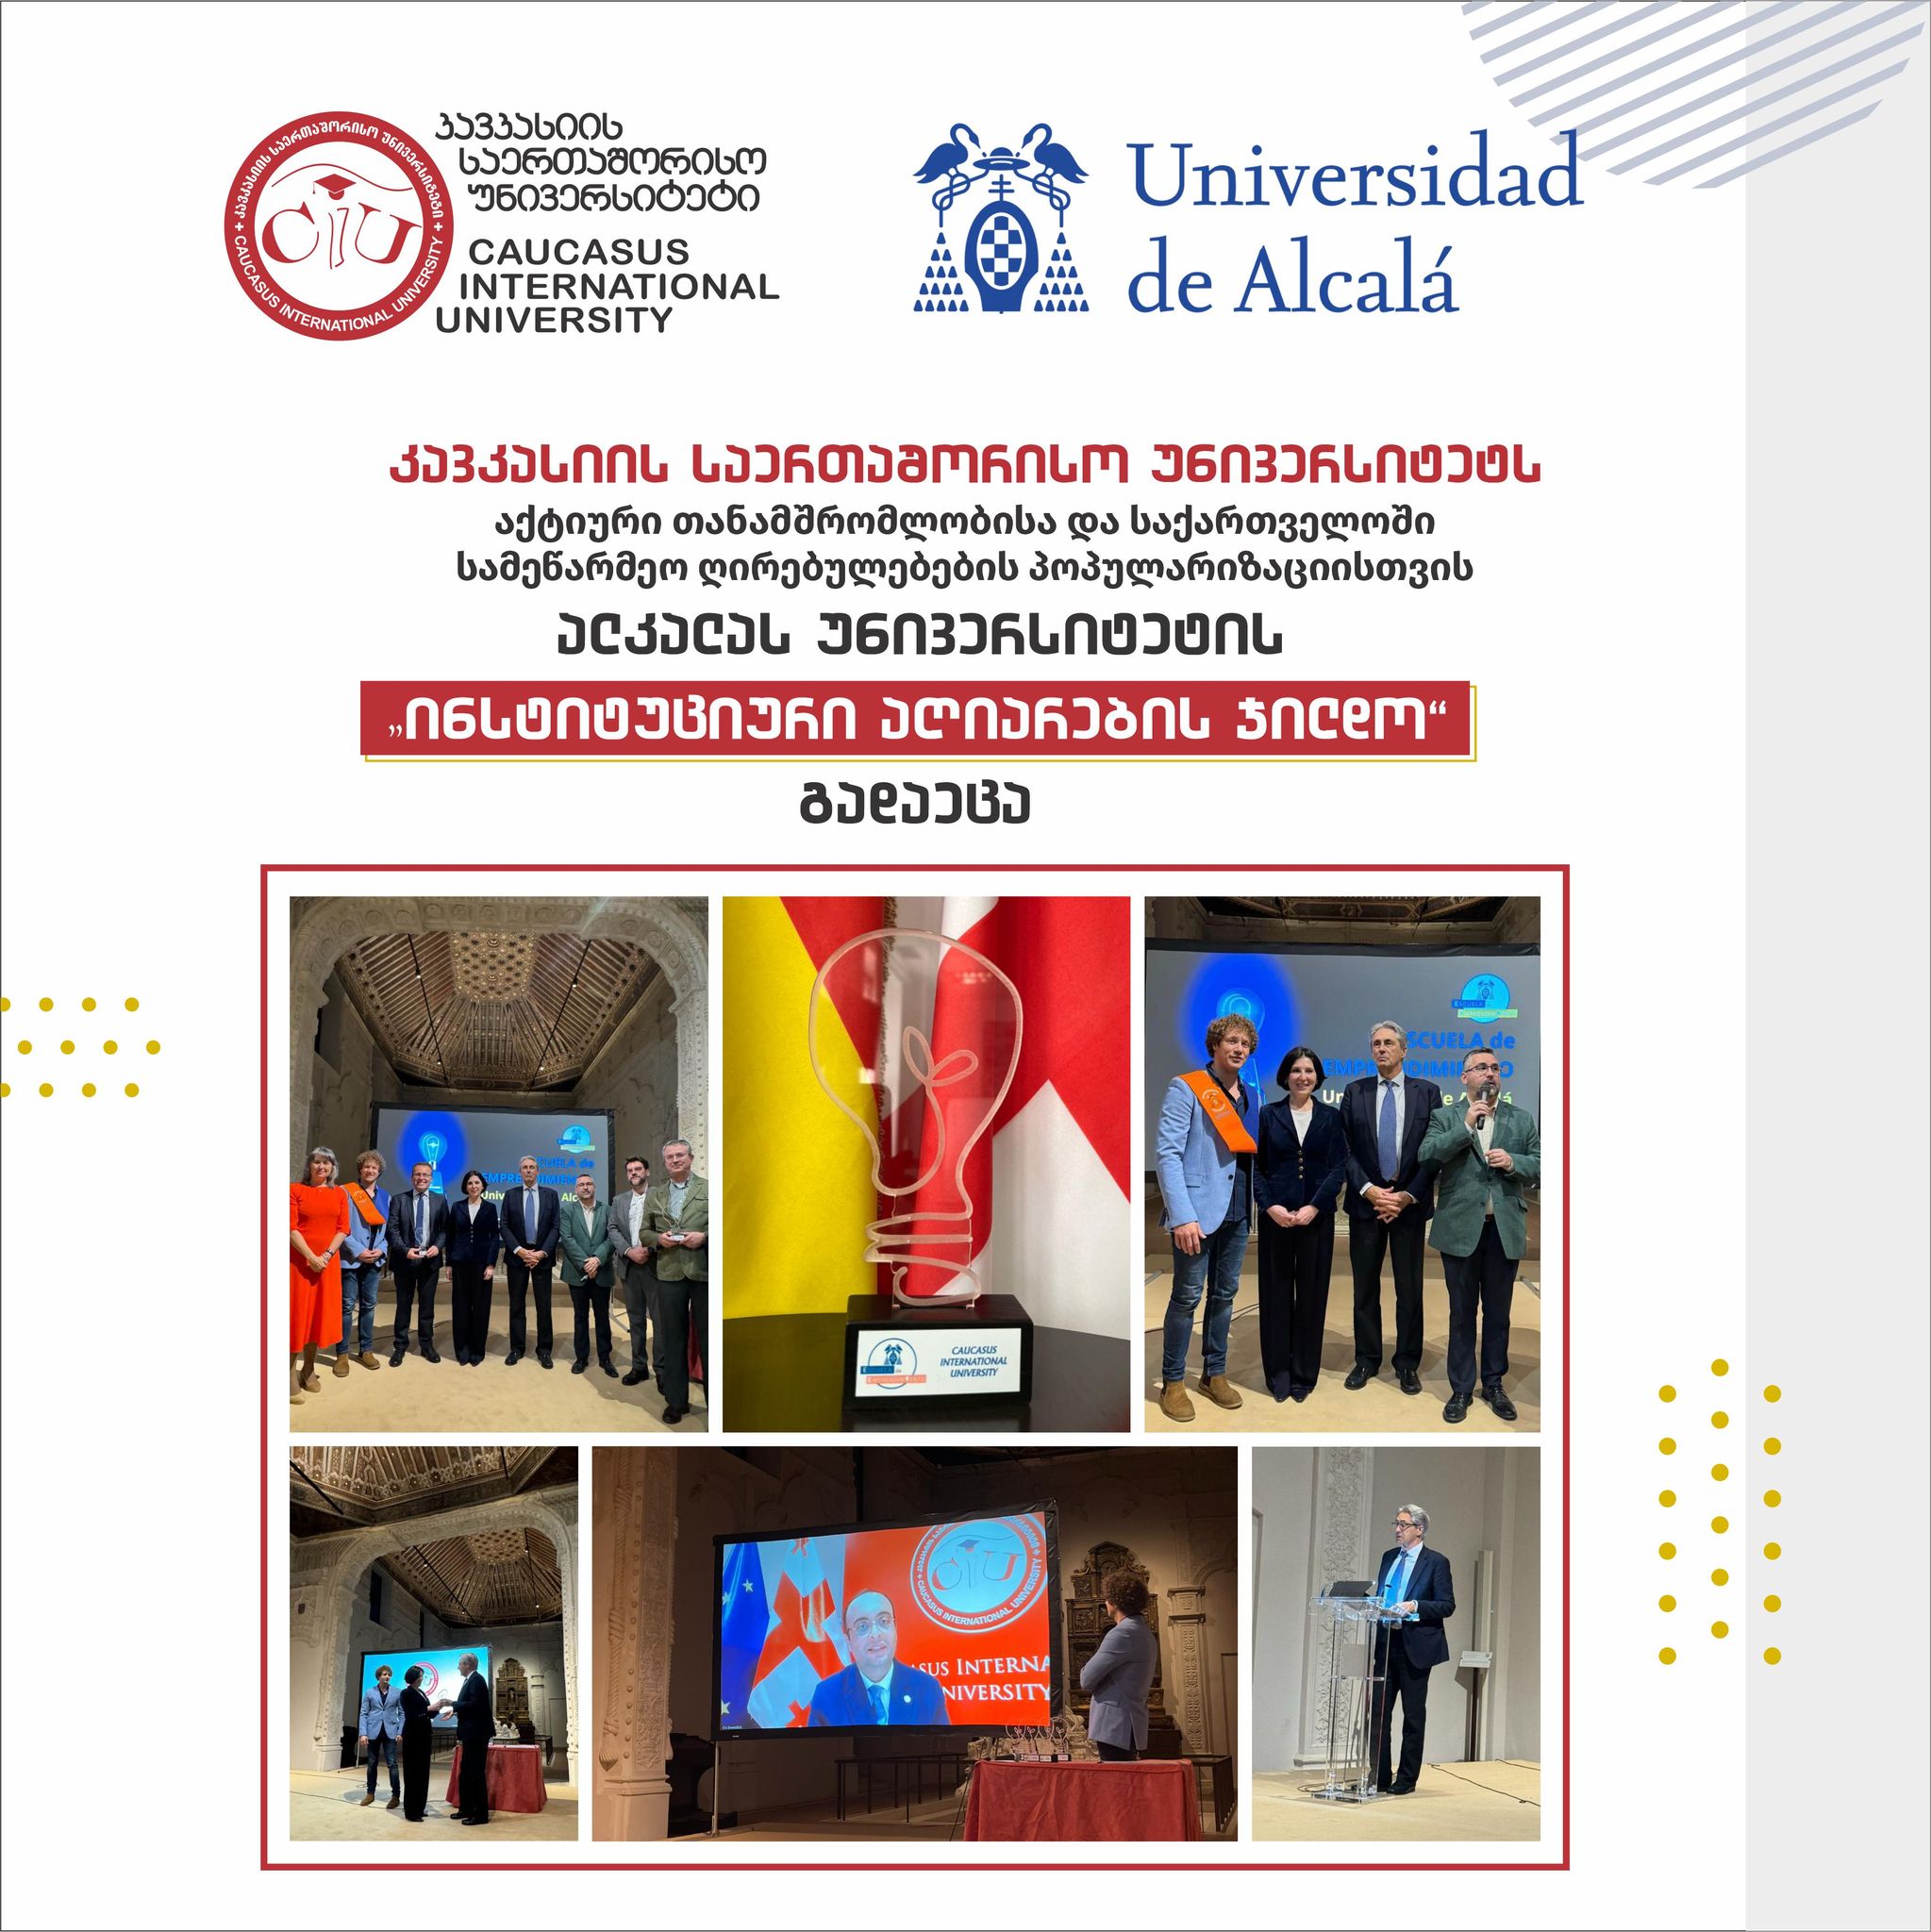 Institutional Recognition Award was given to Caucasus International University